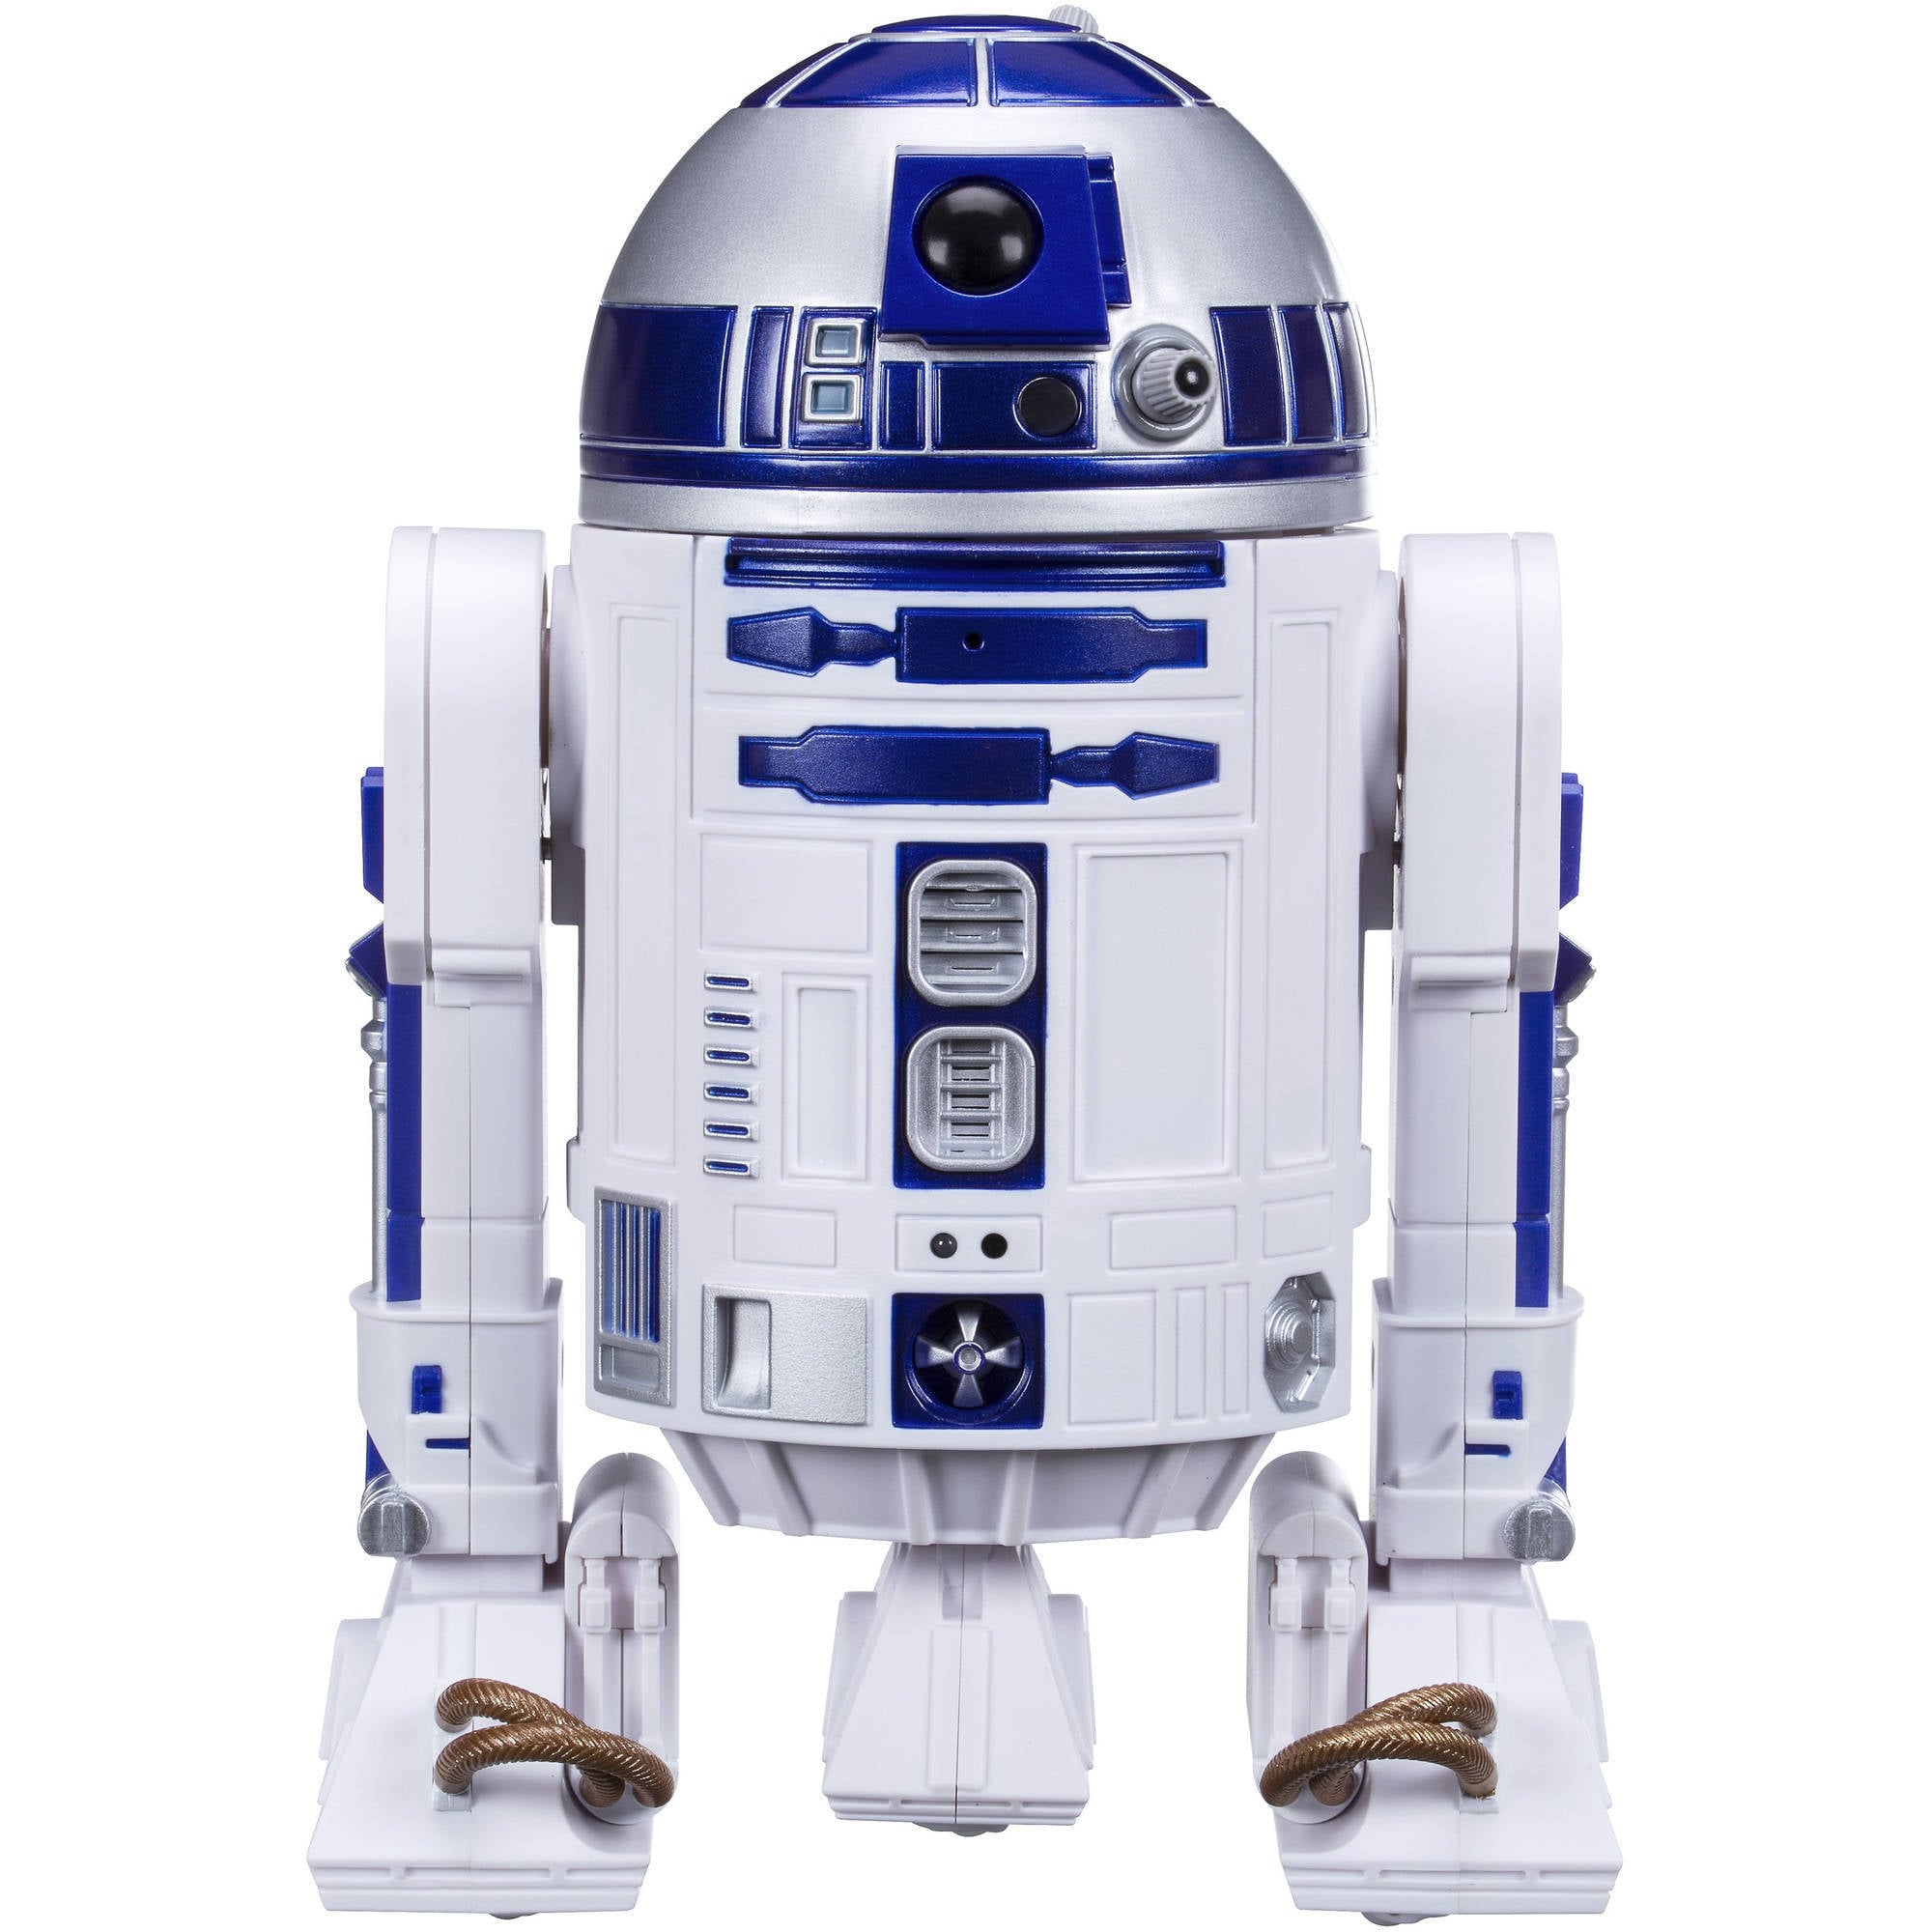 Star Wars The Last Jedi R2-D2 3D Crystal Ball LED Night Light Table Lamp Gift 